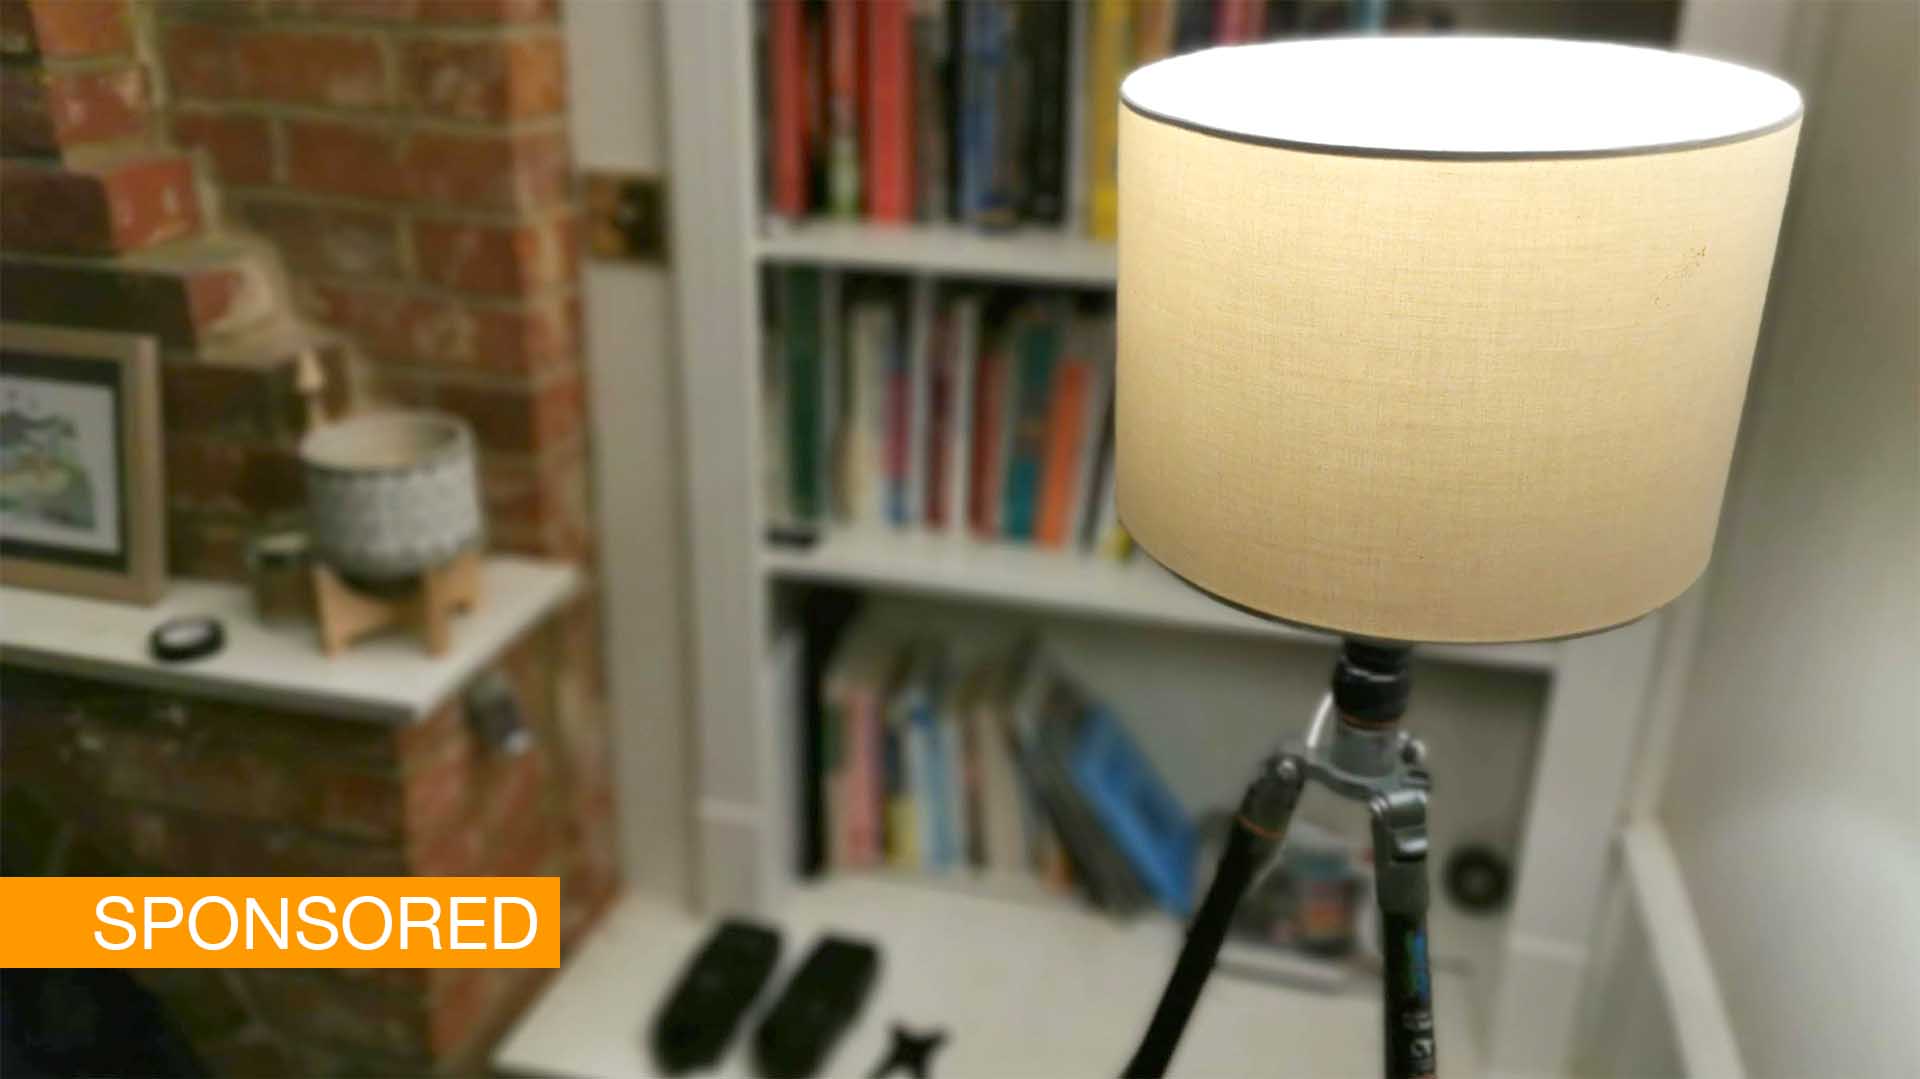 14 alternative uses for your 3LT tripod